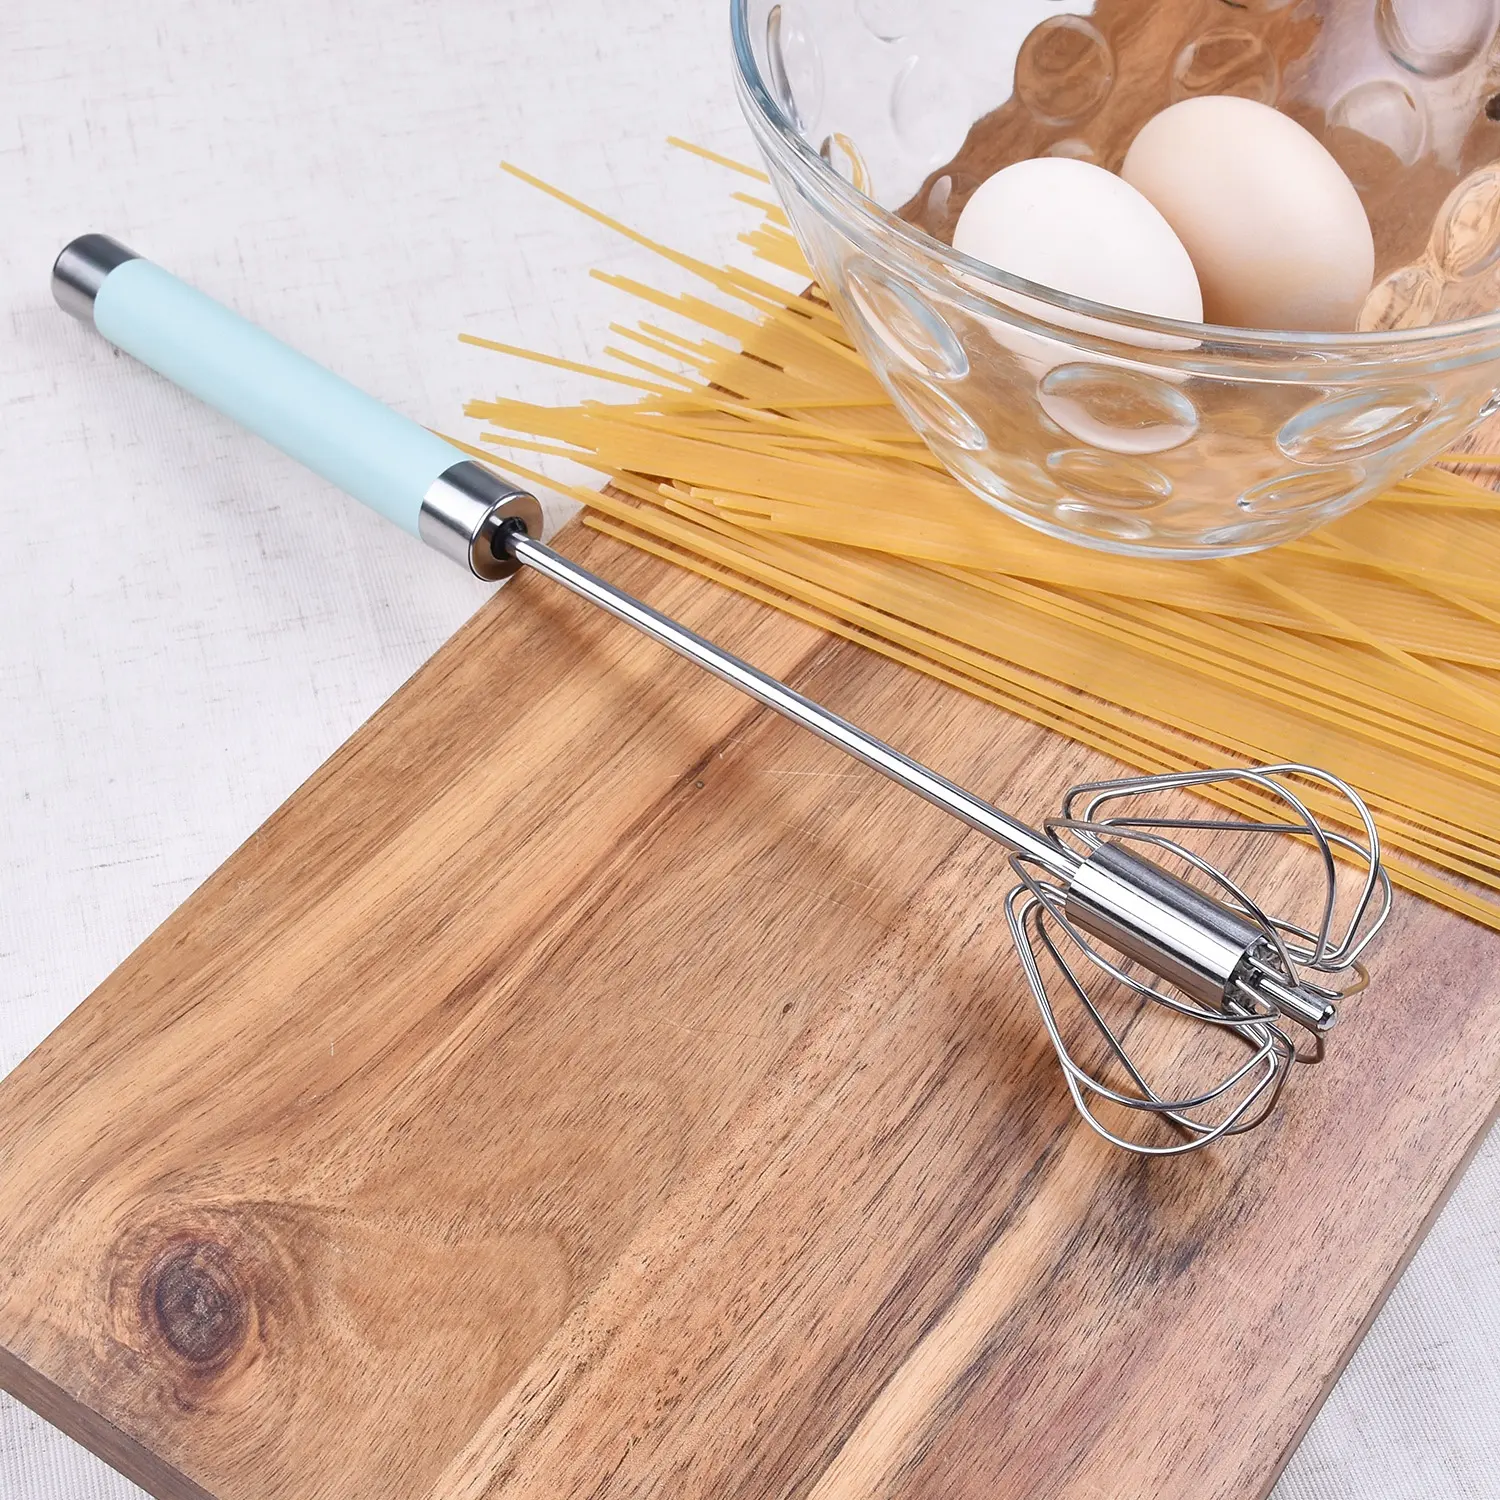 IN STOCK Stainless Steel Hand Push Egg Beater Mixer Home Kitchen Whisk Milk Frother Cooking Utensils Gadgets